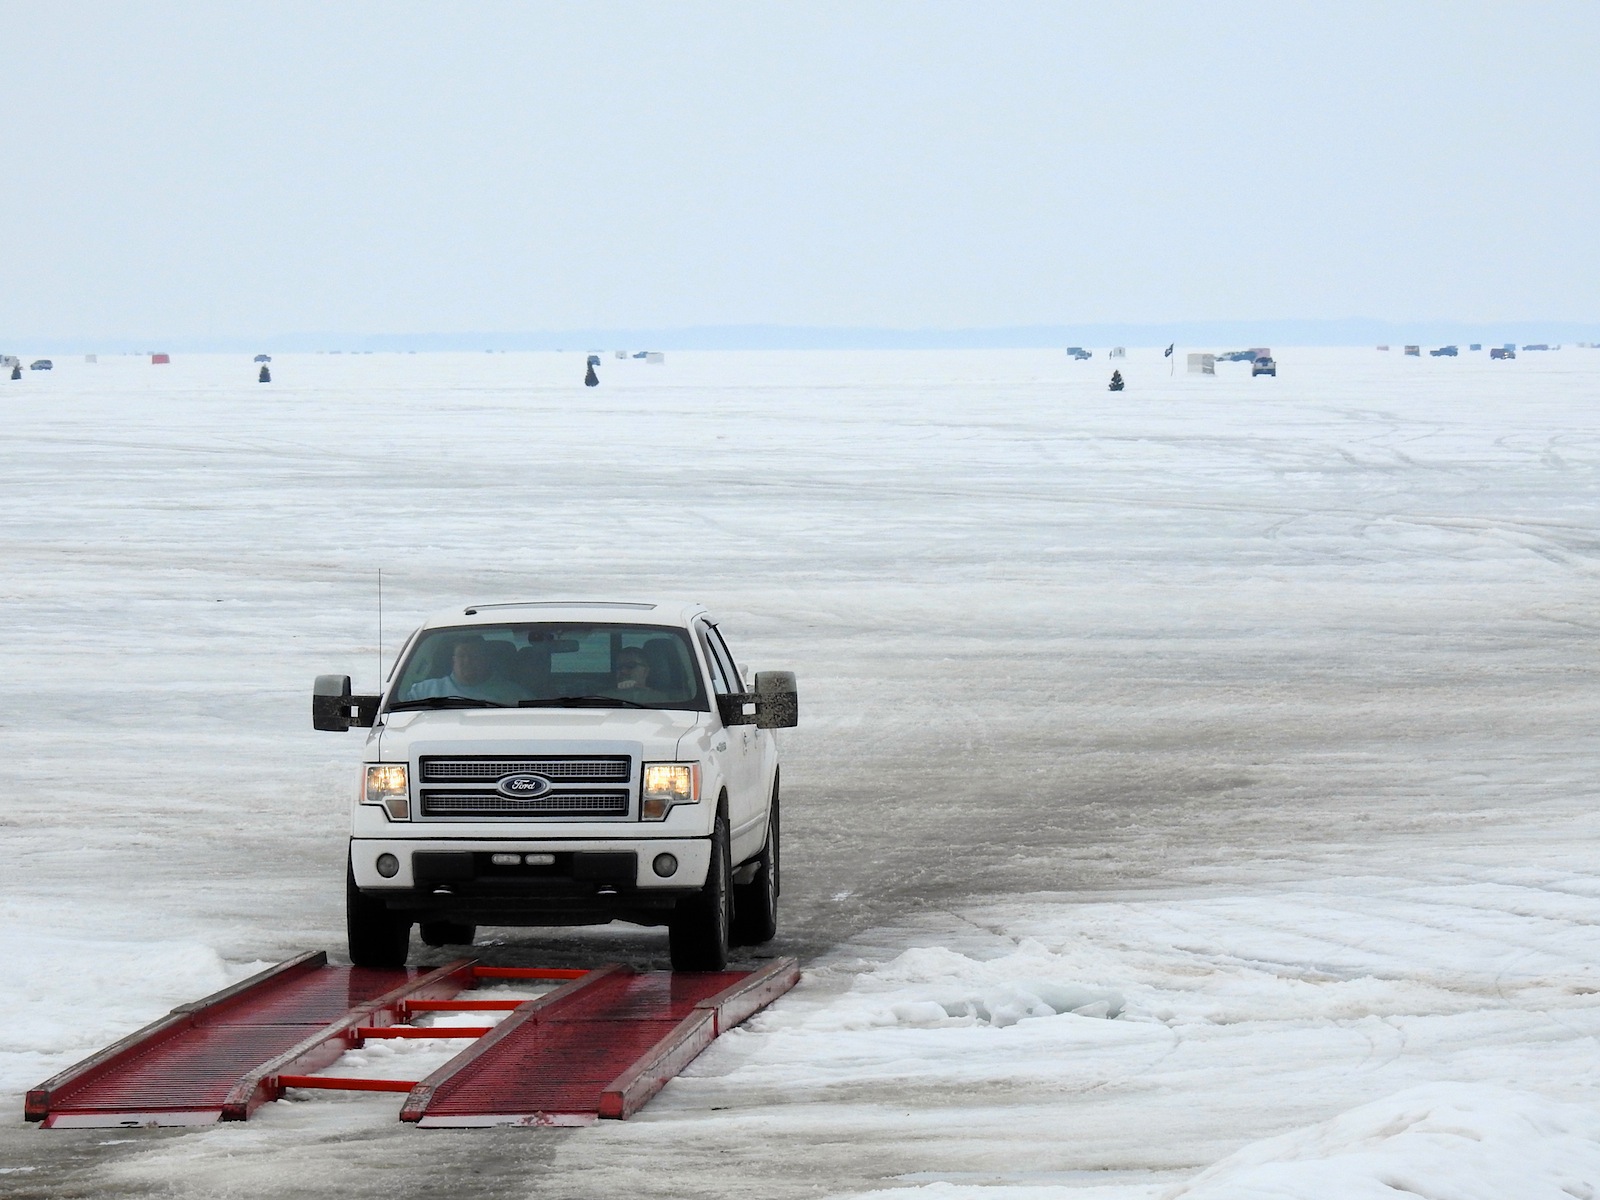 driving on the ice